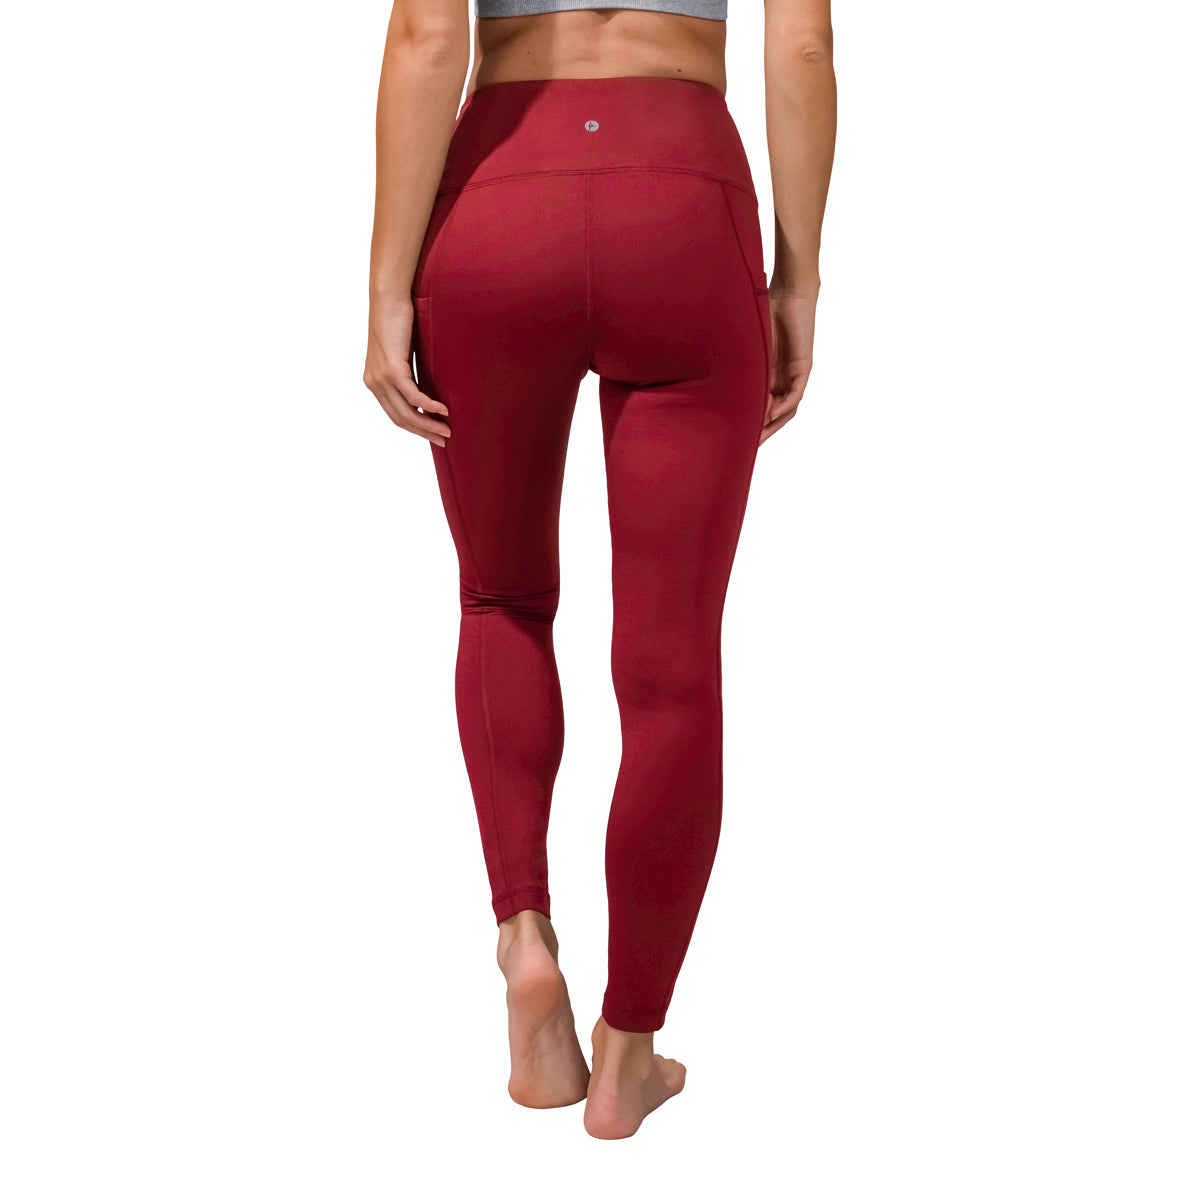 Reitmans High-Rise Pulse Legging with Contrast Piping